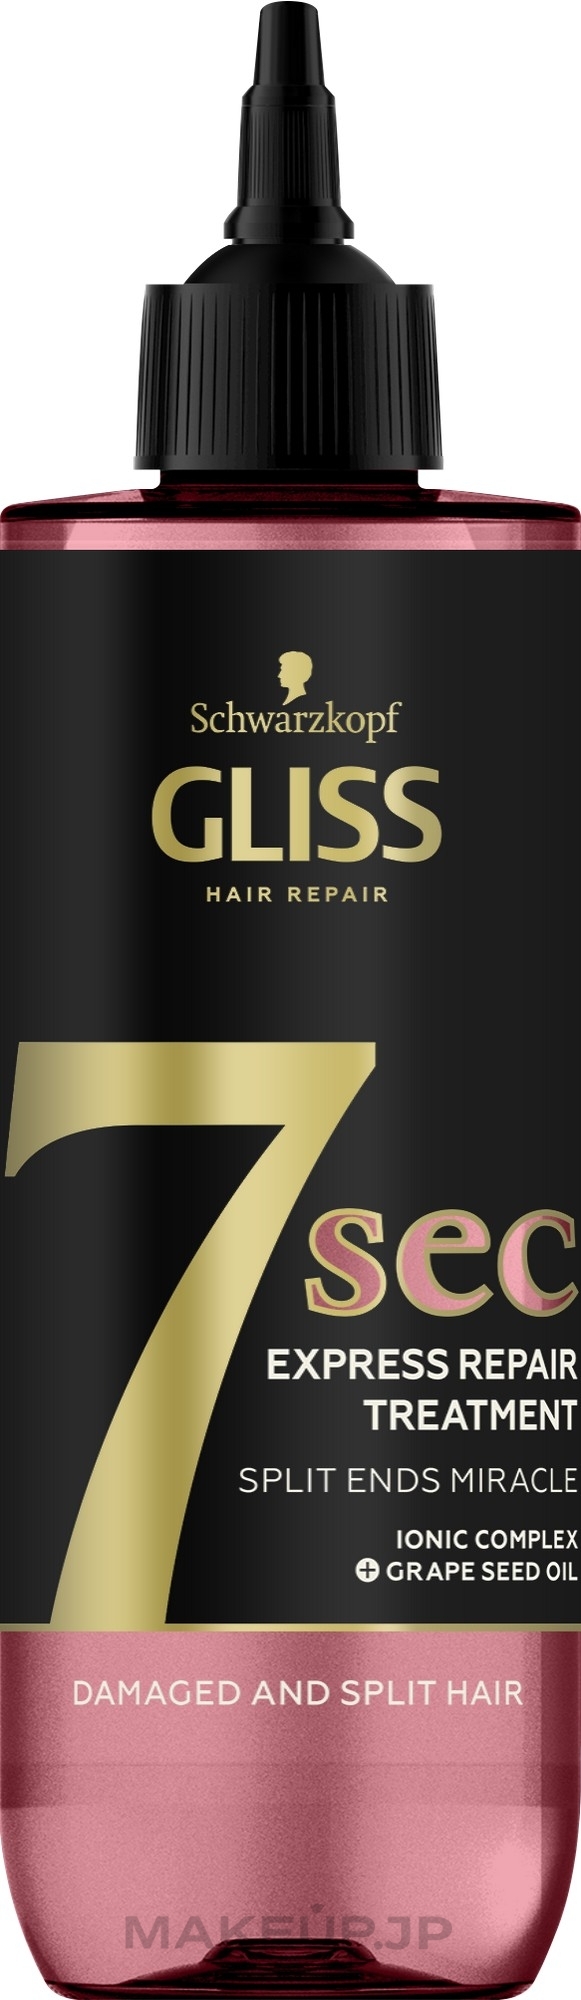 7 Seconds Express Mask for Damaged and Brittle Hair - Gliss 7sec Split Ends Miracle — photo 200 ml